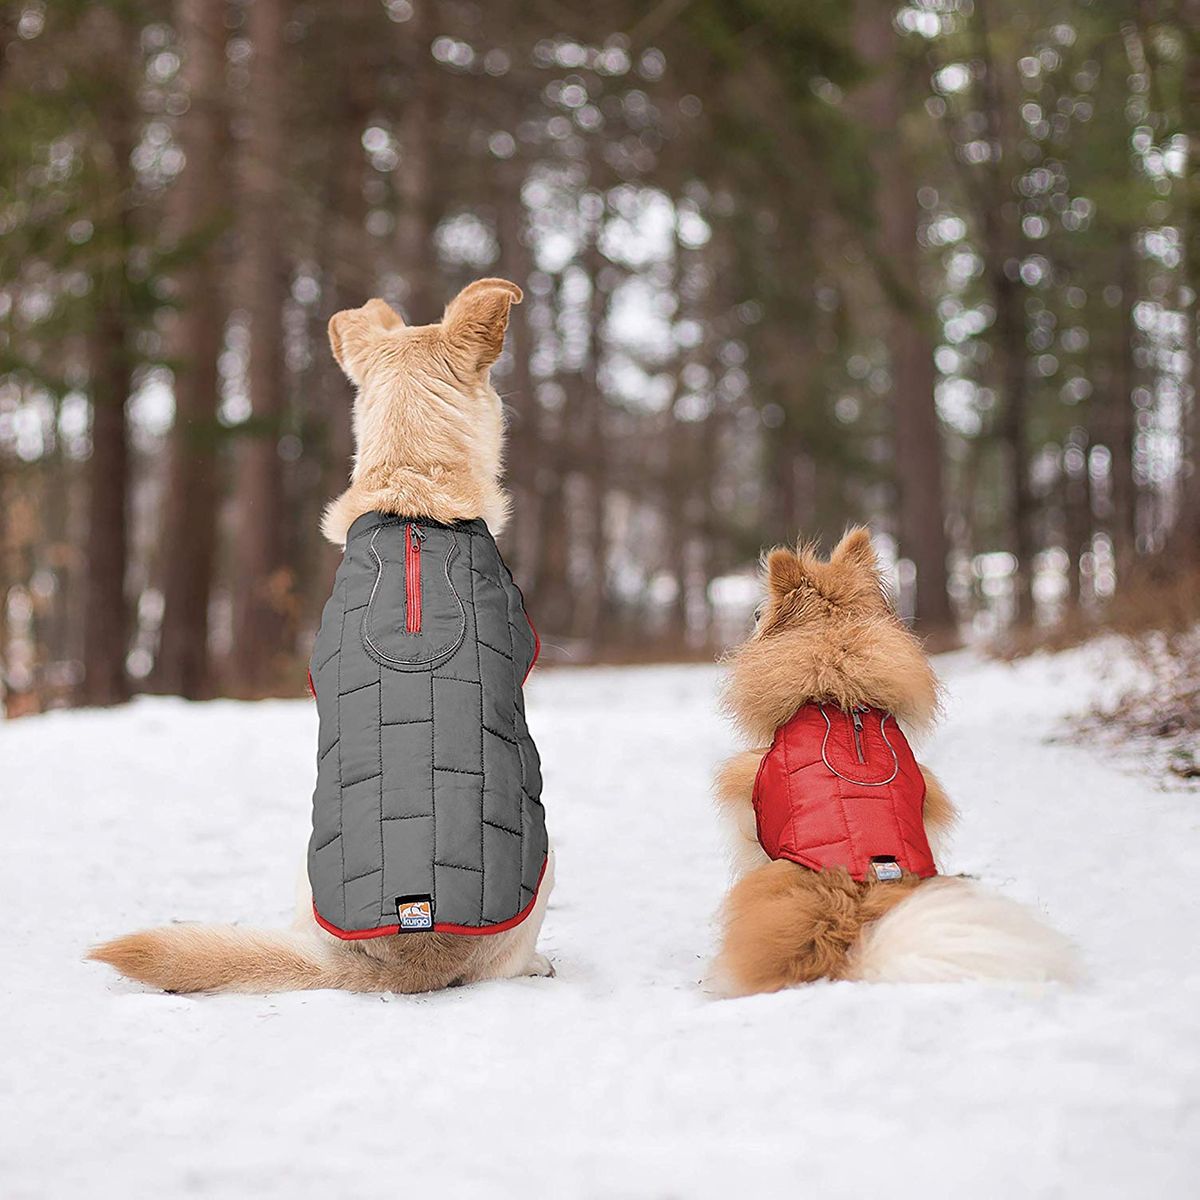 Cold Weather Padded Dog Vest Apparel Clothes for Cats Puppy Small Dogs Dog Winter Coat Harness Outdoor Warm Small Dog Jacket